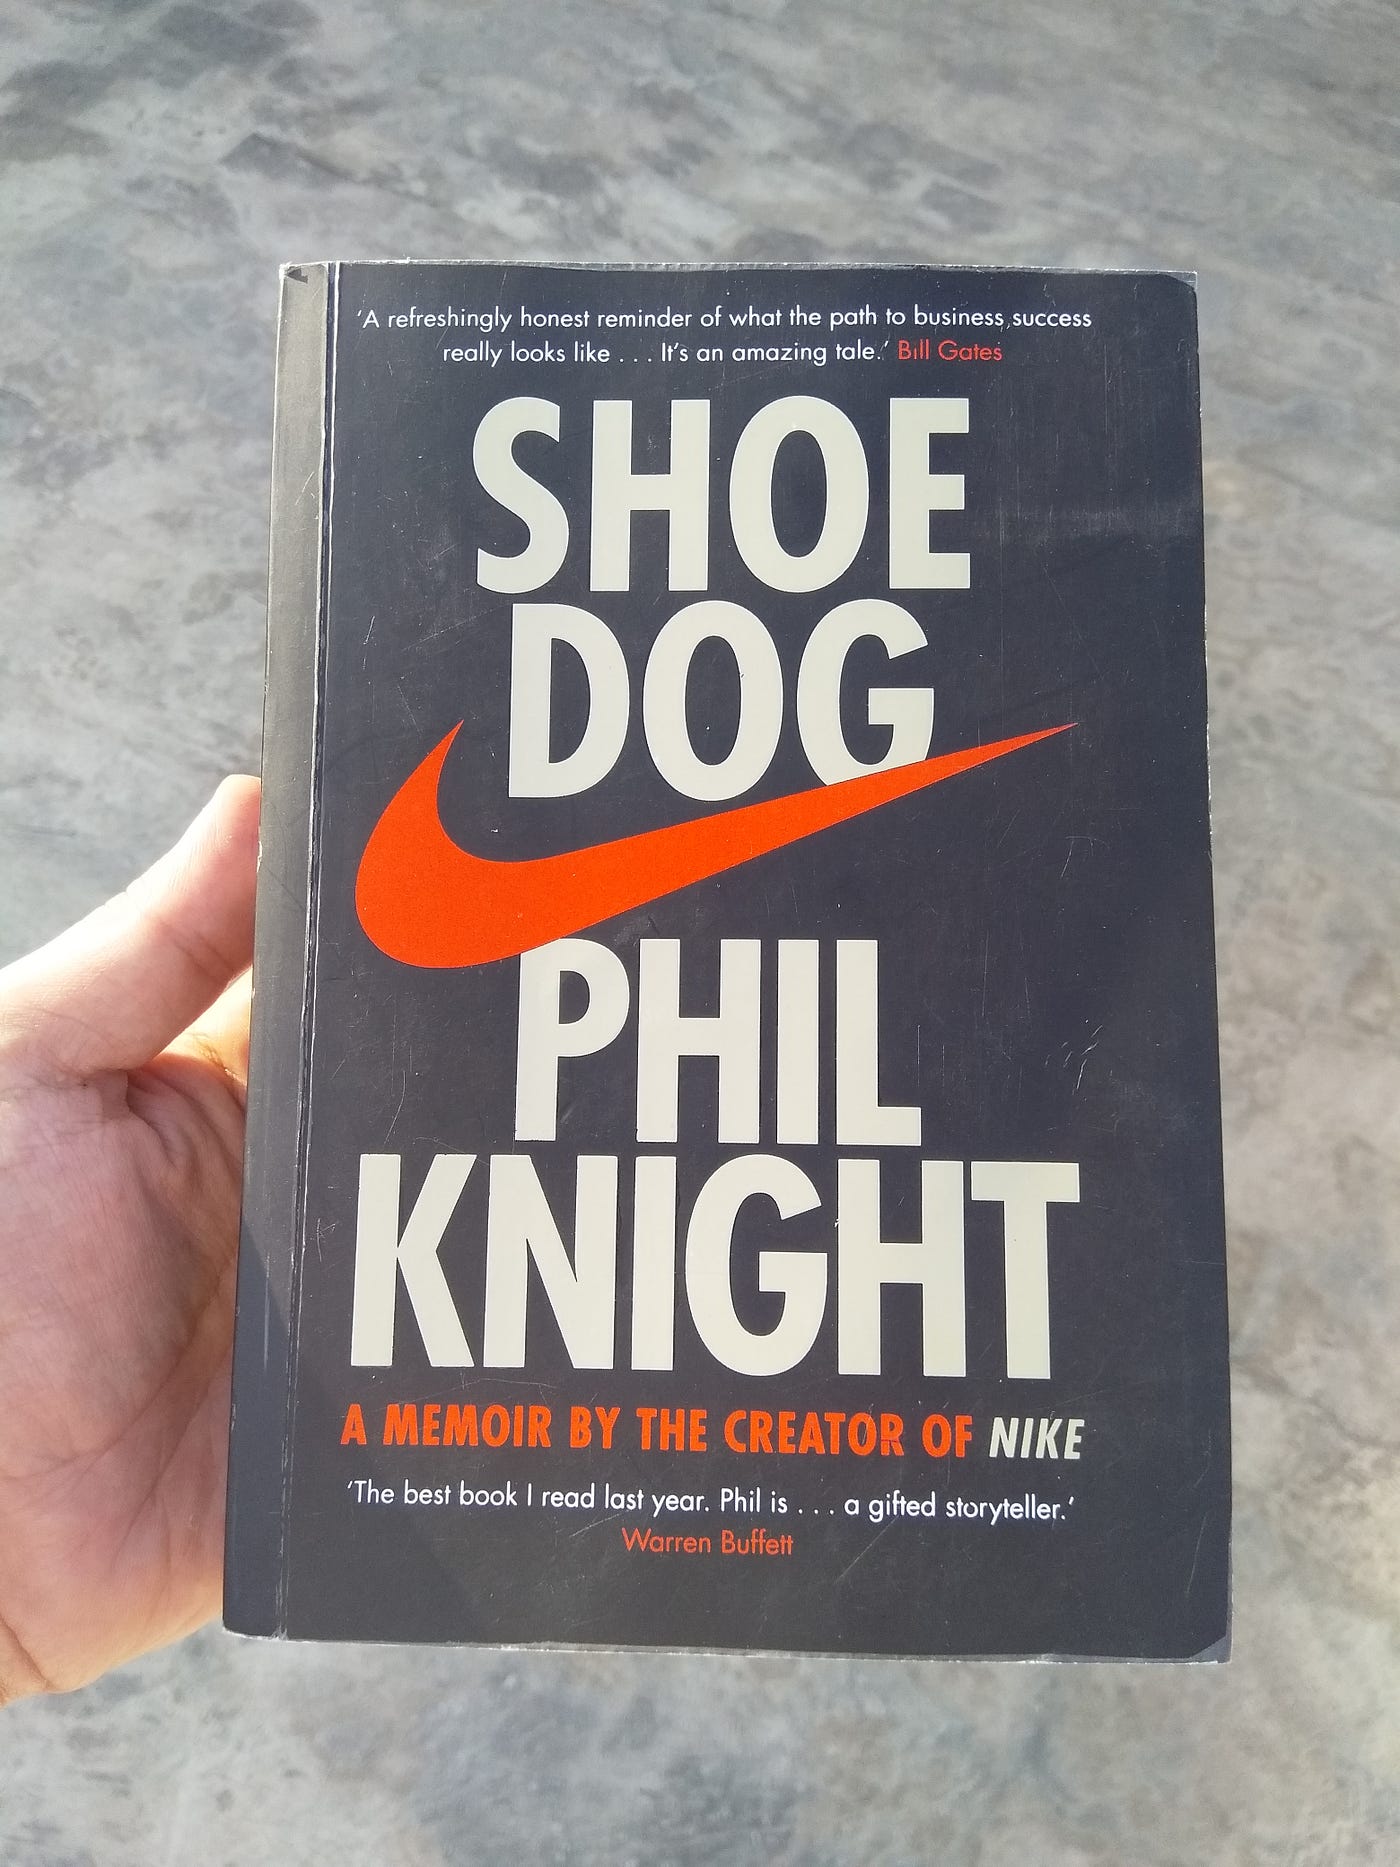 Lessons from Phil Knight | ILLUMINATION